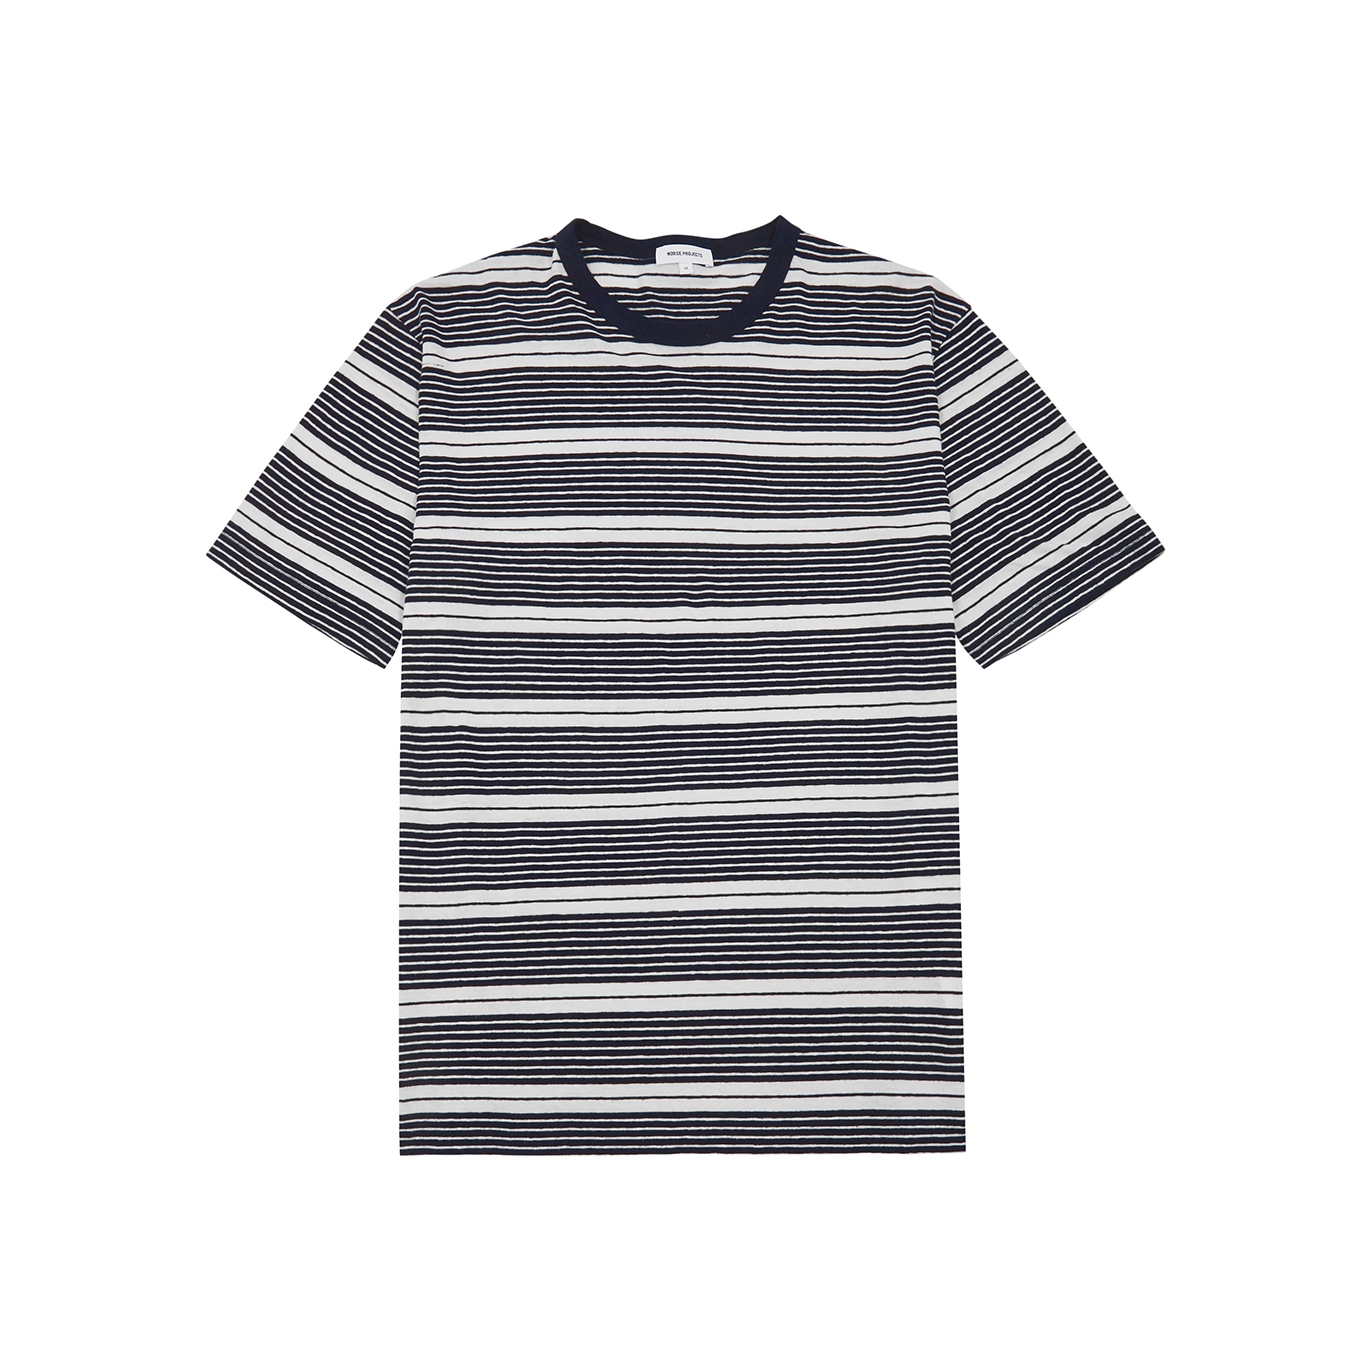 NORSE PROJECTS JOHANNES STRIPED COTTON-BLEND T-SHIRT